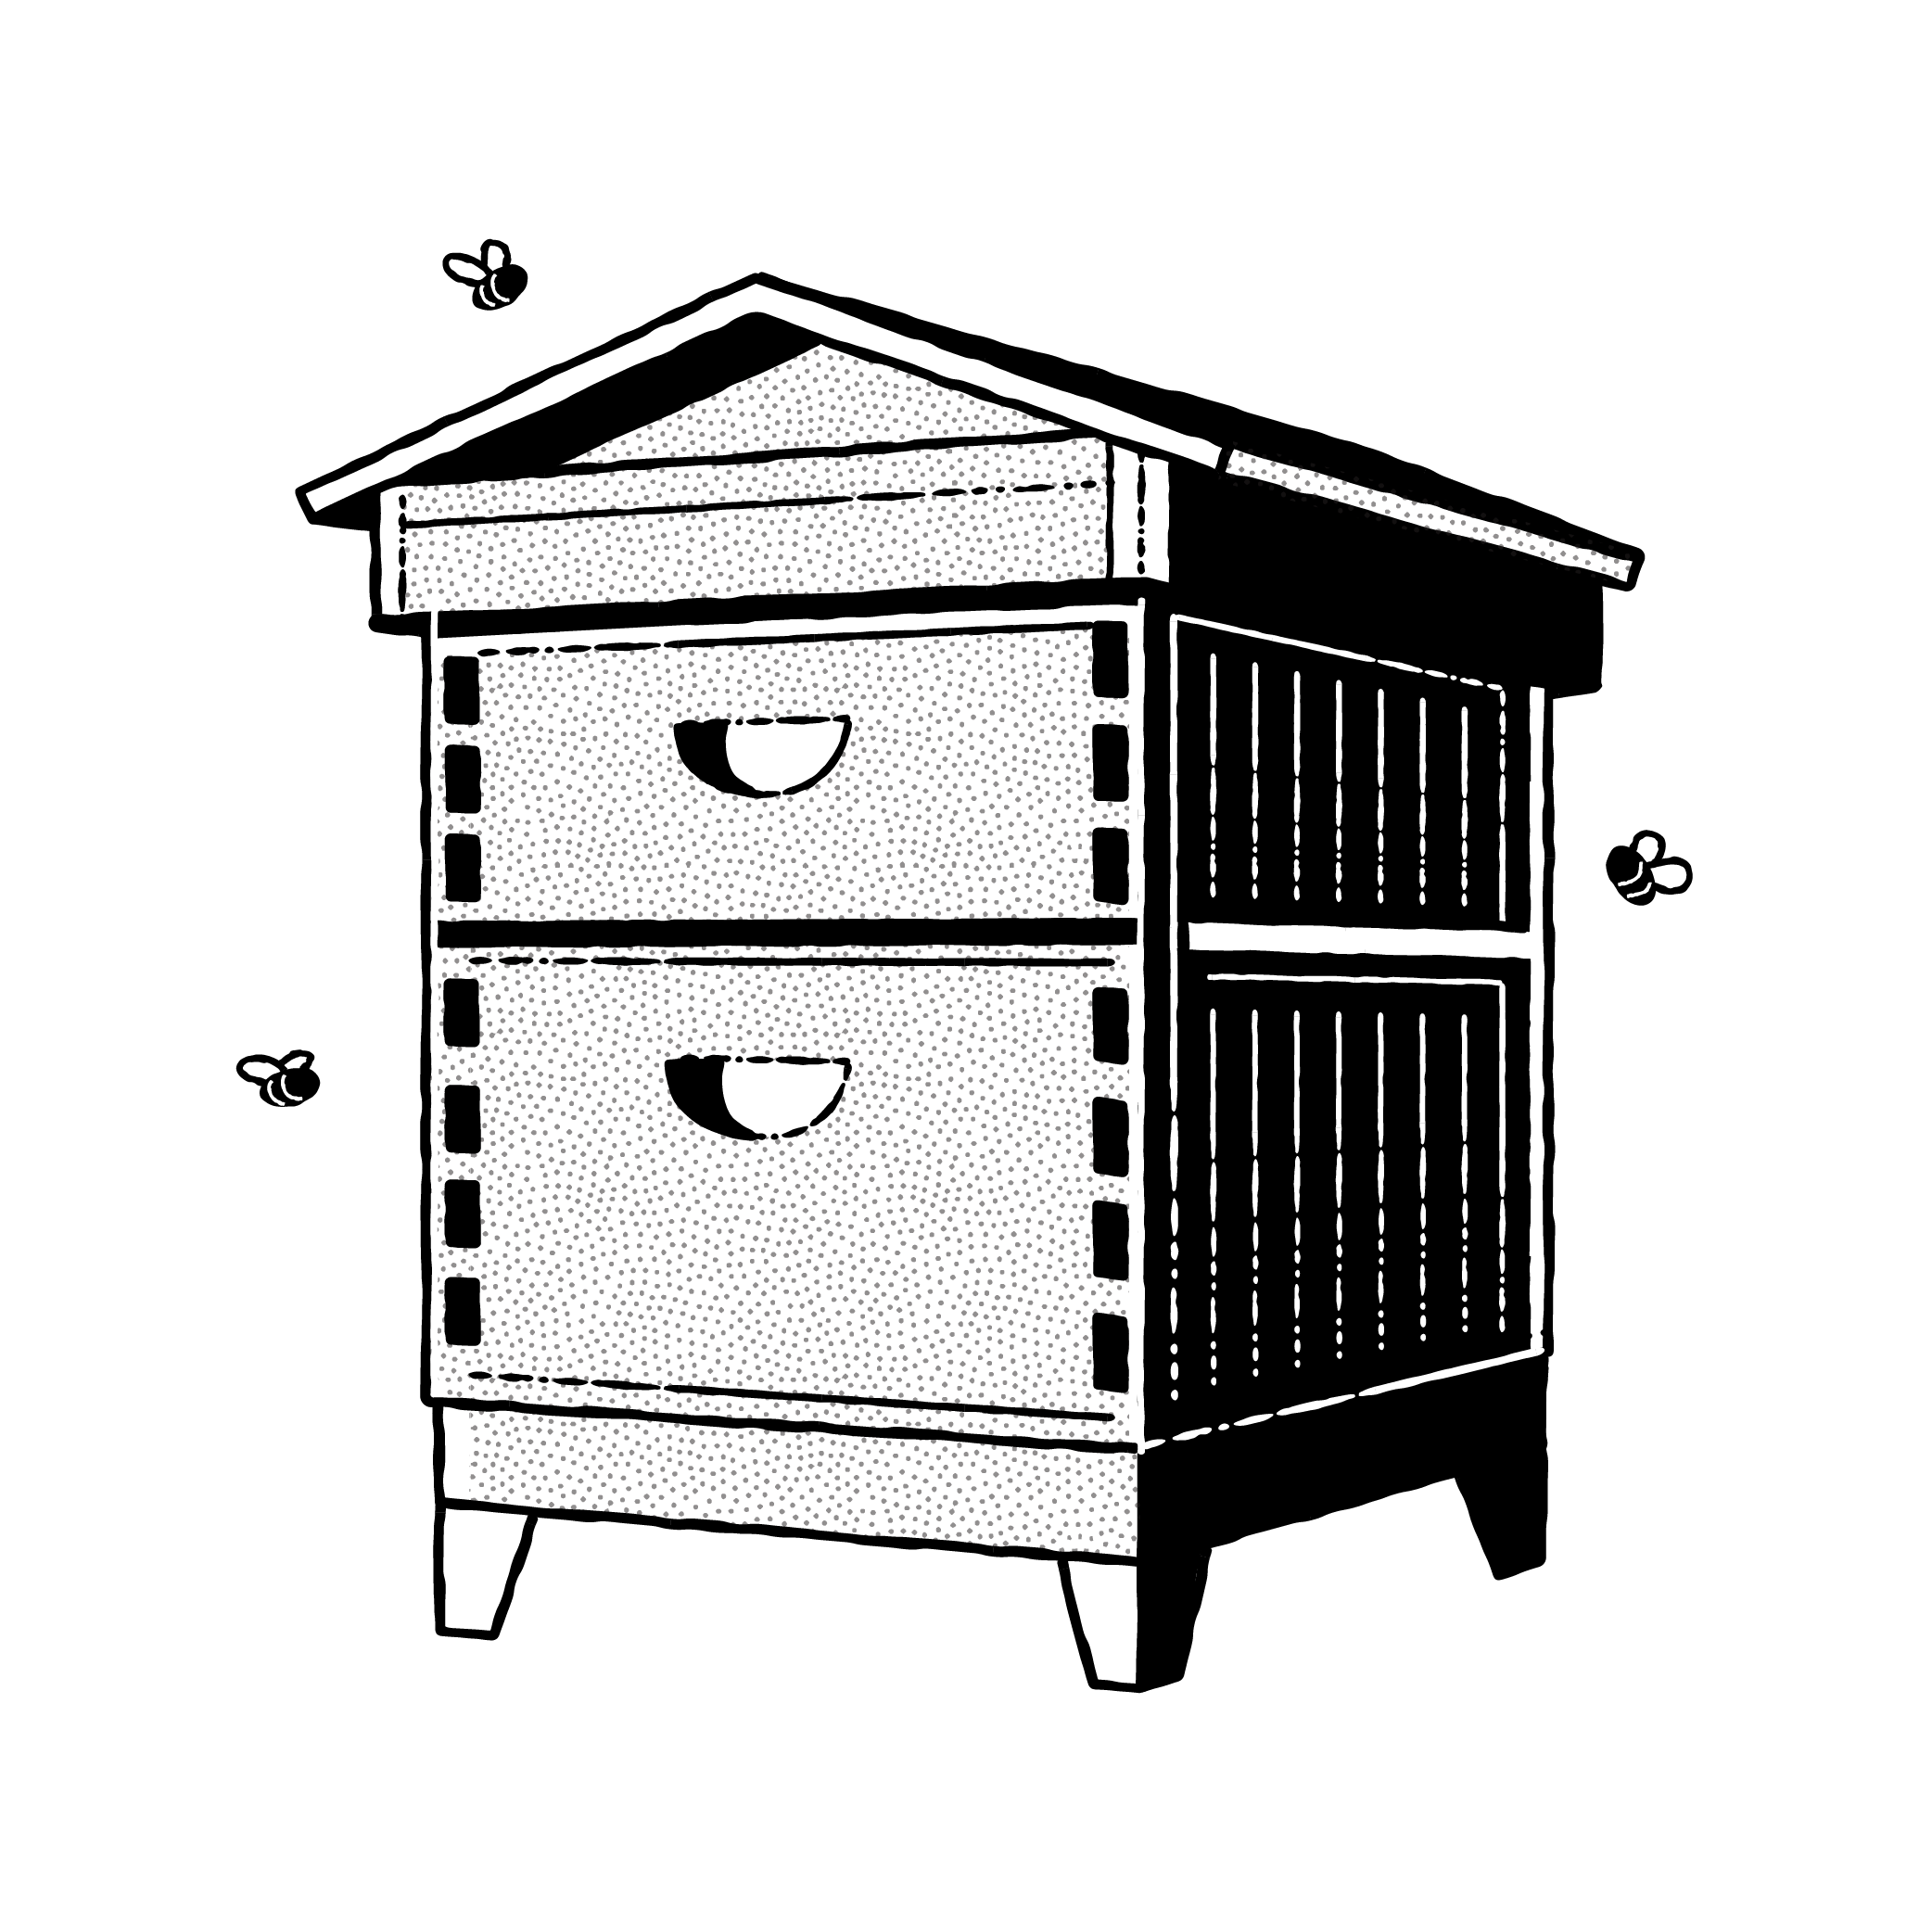 Illustration of a beehive with two chambers and a sloped roof. Three bees are flying around the hive. The image is in a black and white stippled style.